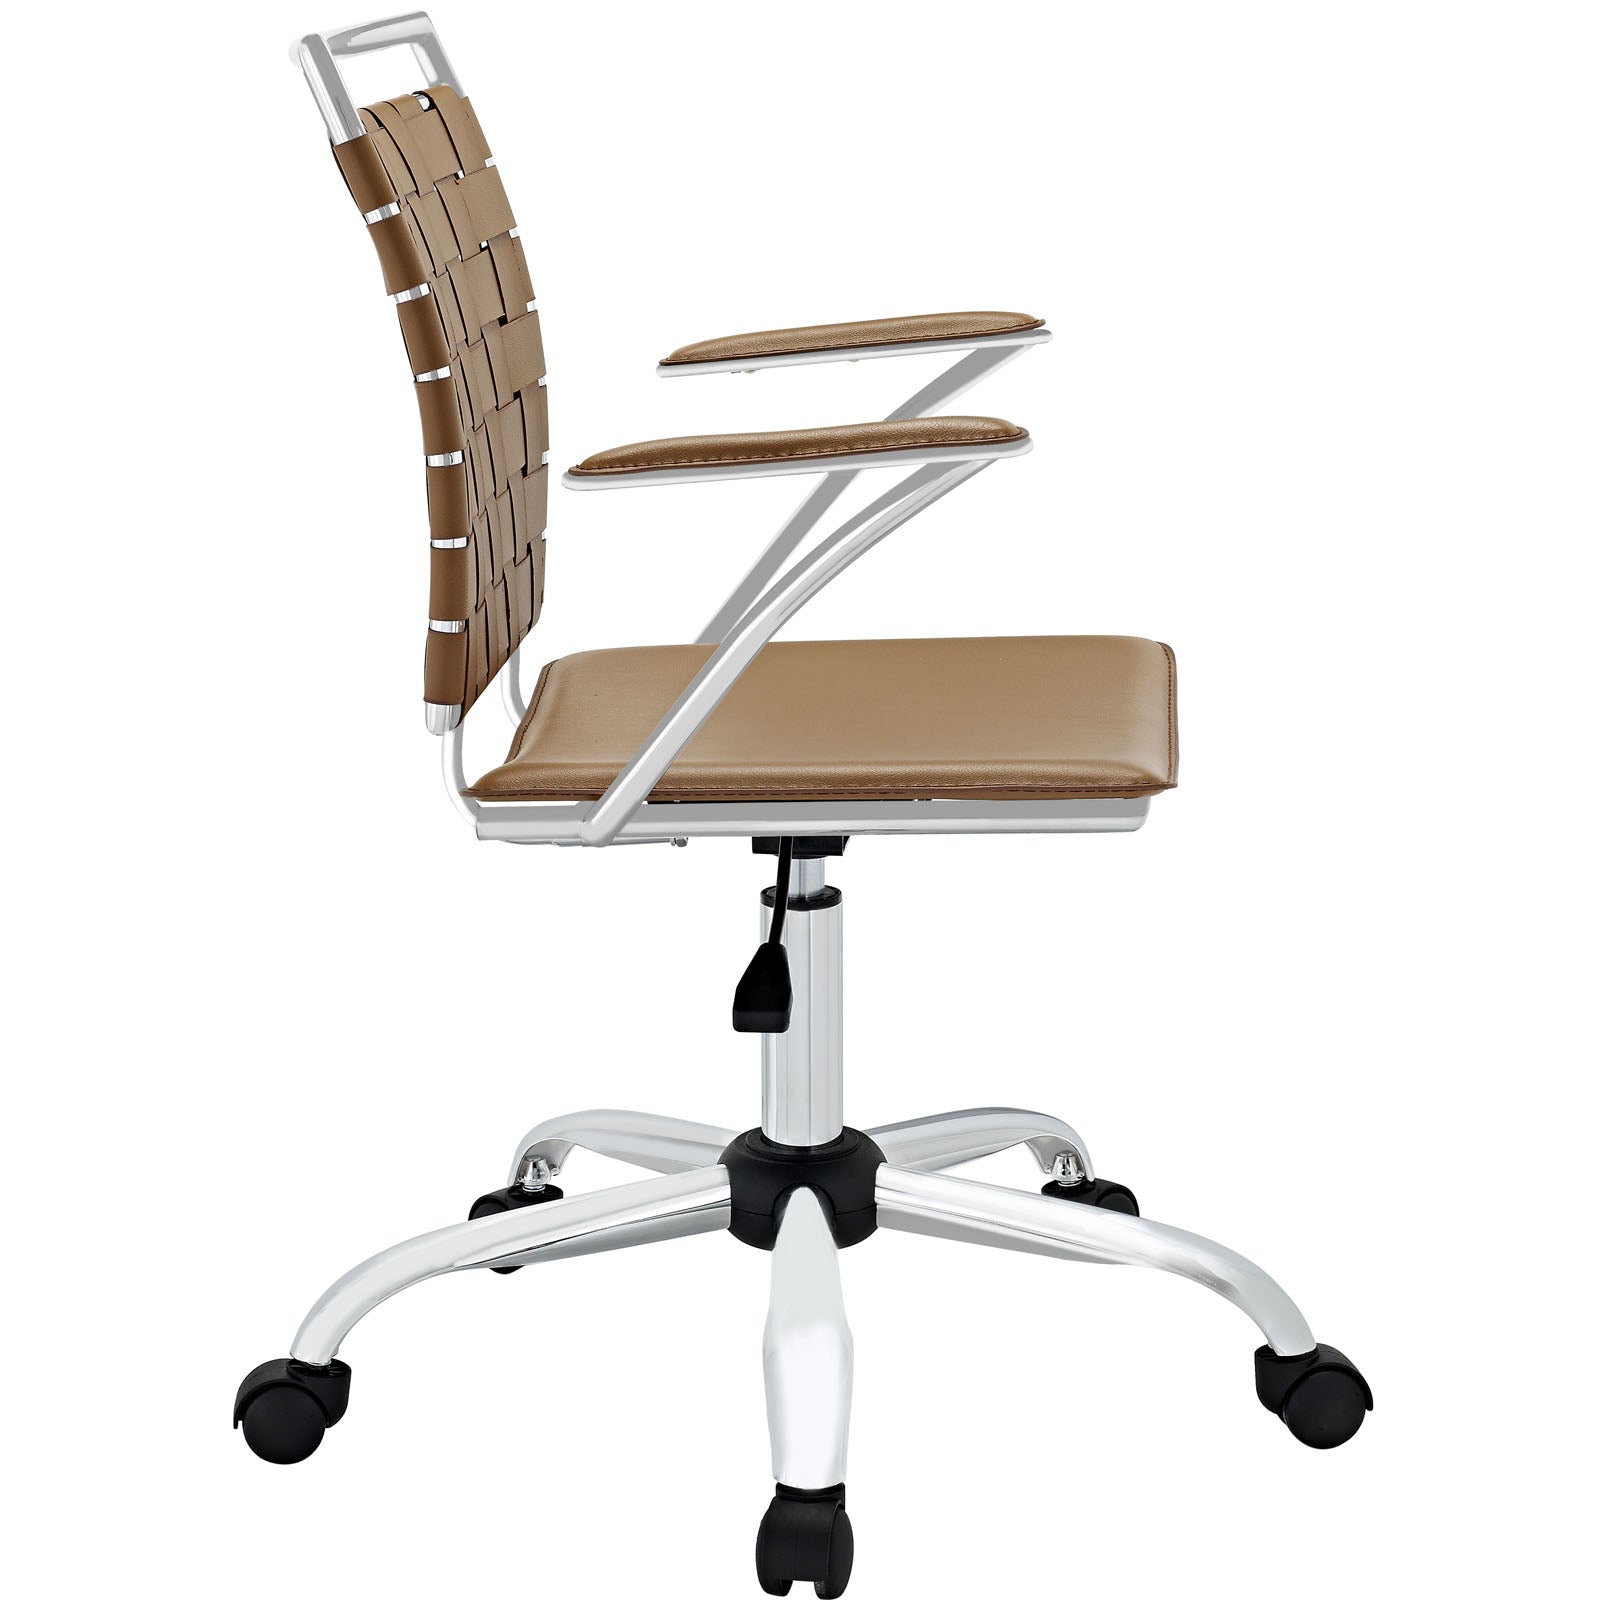 Fuse Office Chair - East Shore Modern Home Furnishings